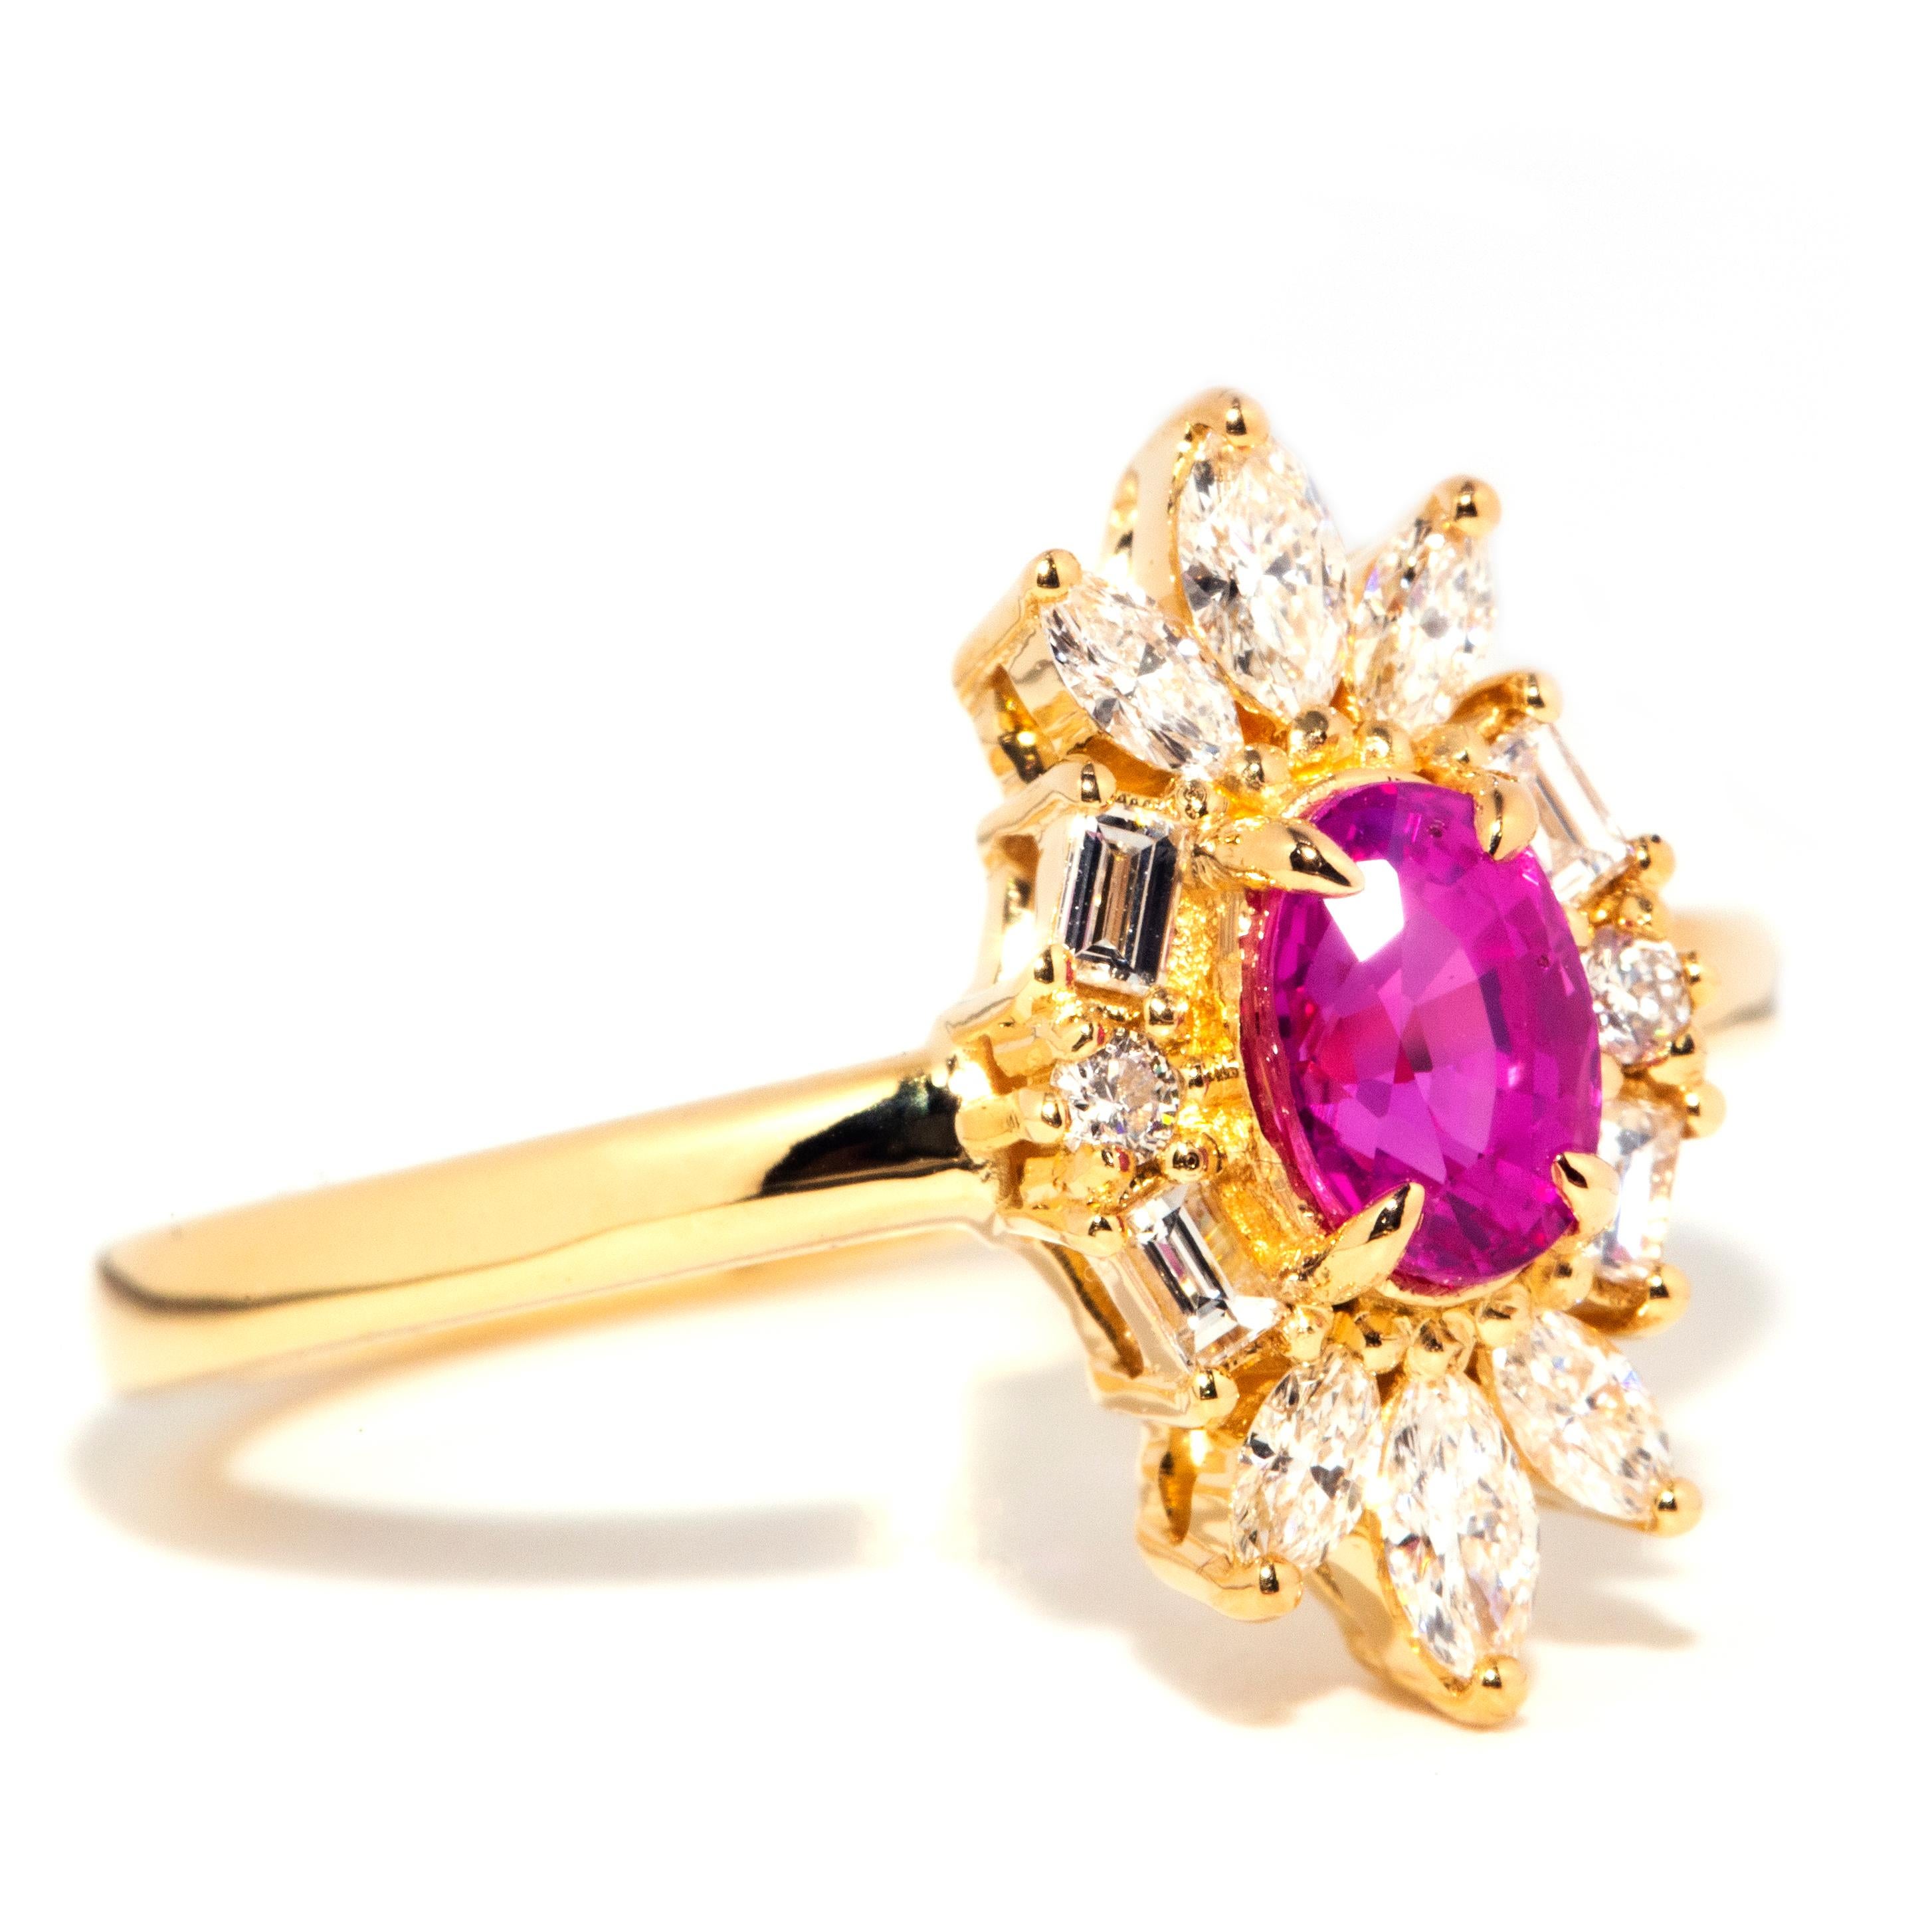 Lovingly crafted in 18 carat yellow gold, this gorgeous contemporary ring features a fabulous oval cut natural bright intense deep pink sapphire at the centre of a captivating elongated starburst cluster of marquise, baguette, and round brilliant